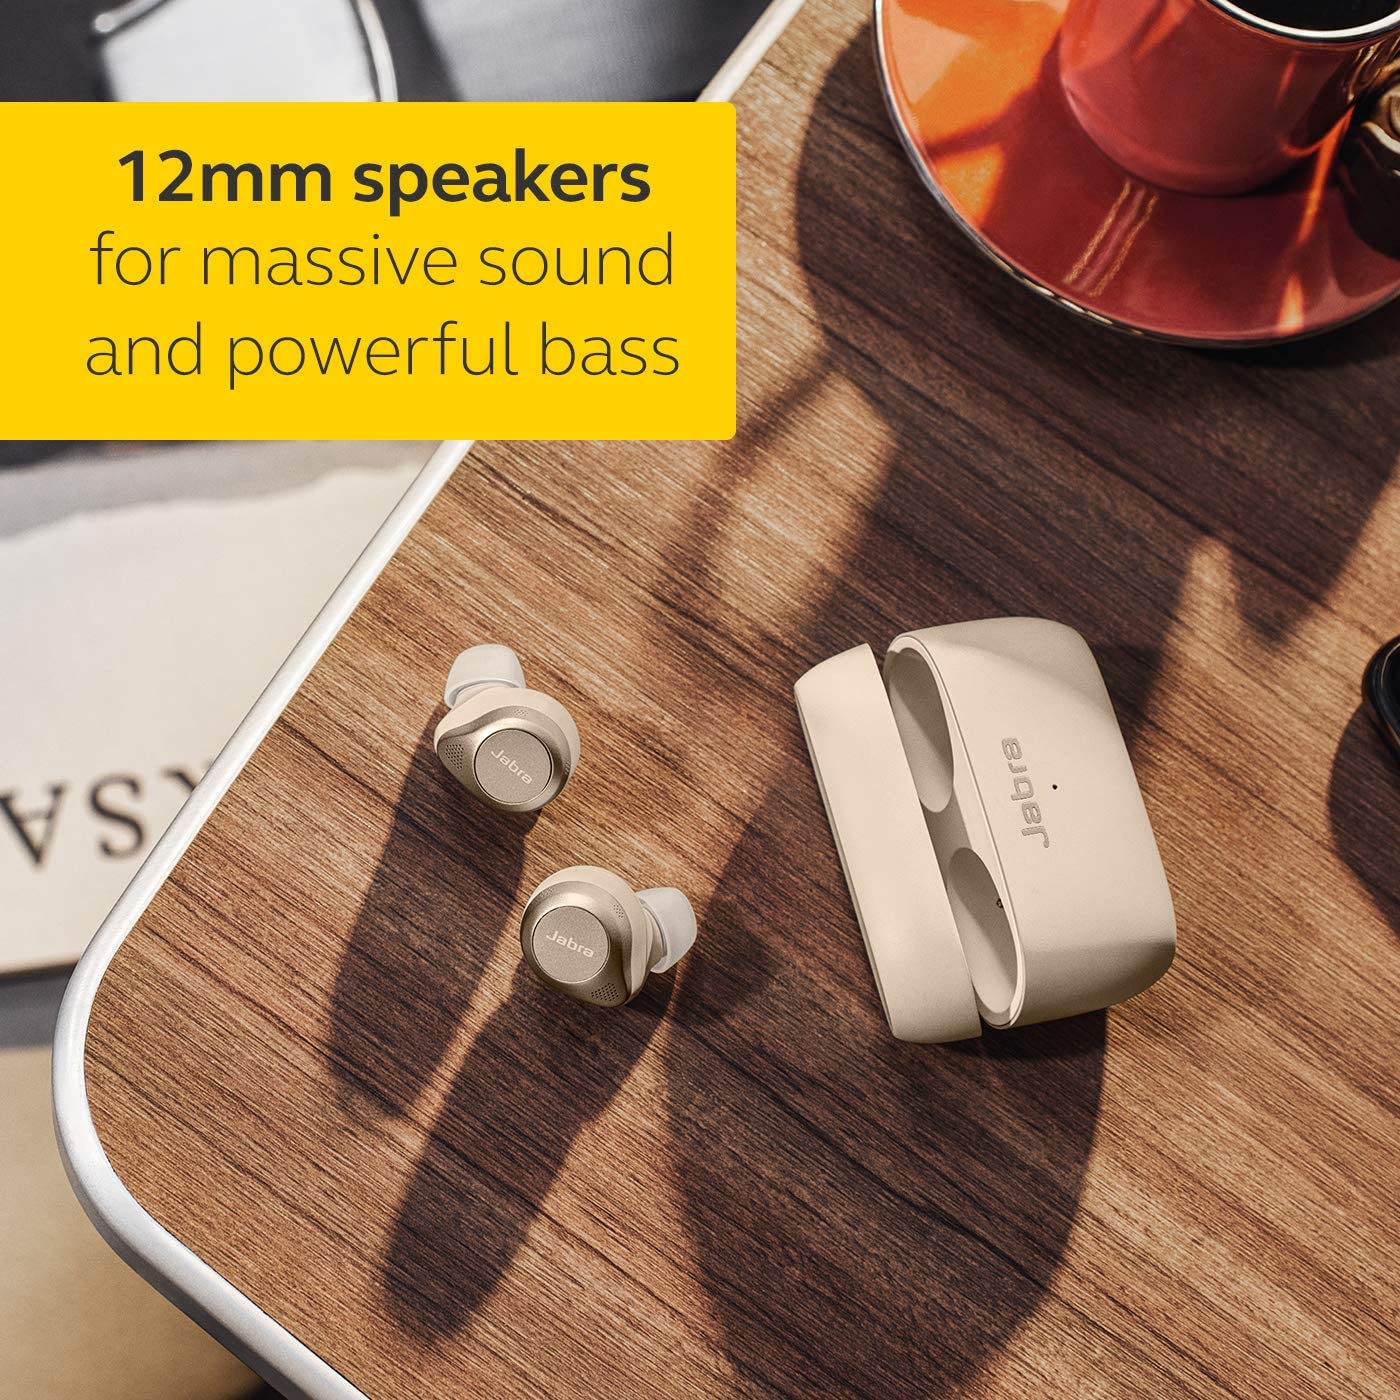 Jabra Elite 85t True Wireless Earbuds - Jabra Advanced Active Noise Cancellation with Long Battery Life, Powerful Speakers and Alexa Built-in - Wireless Charging Case - Gold beige